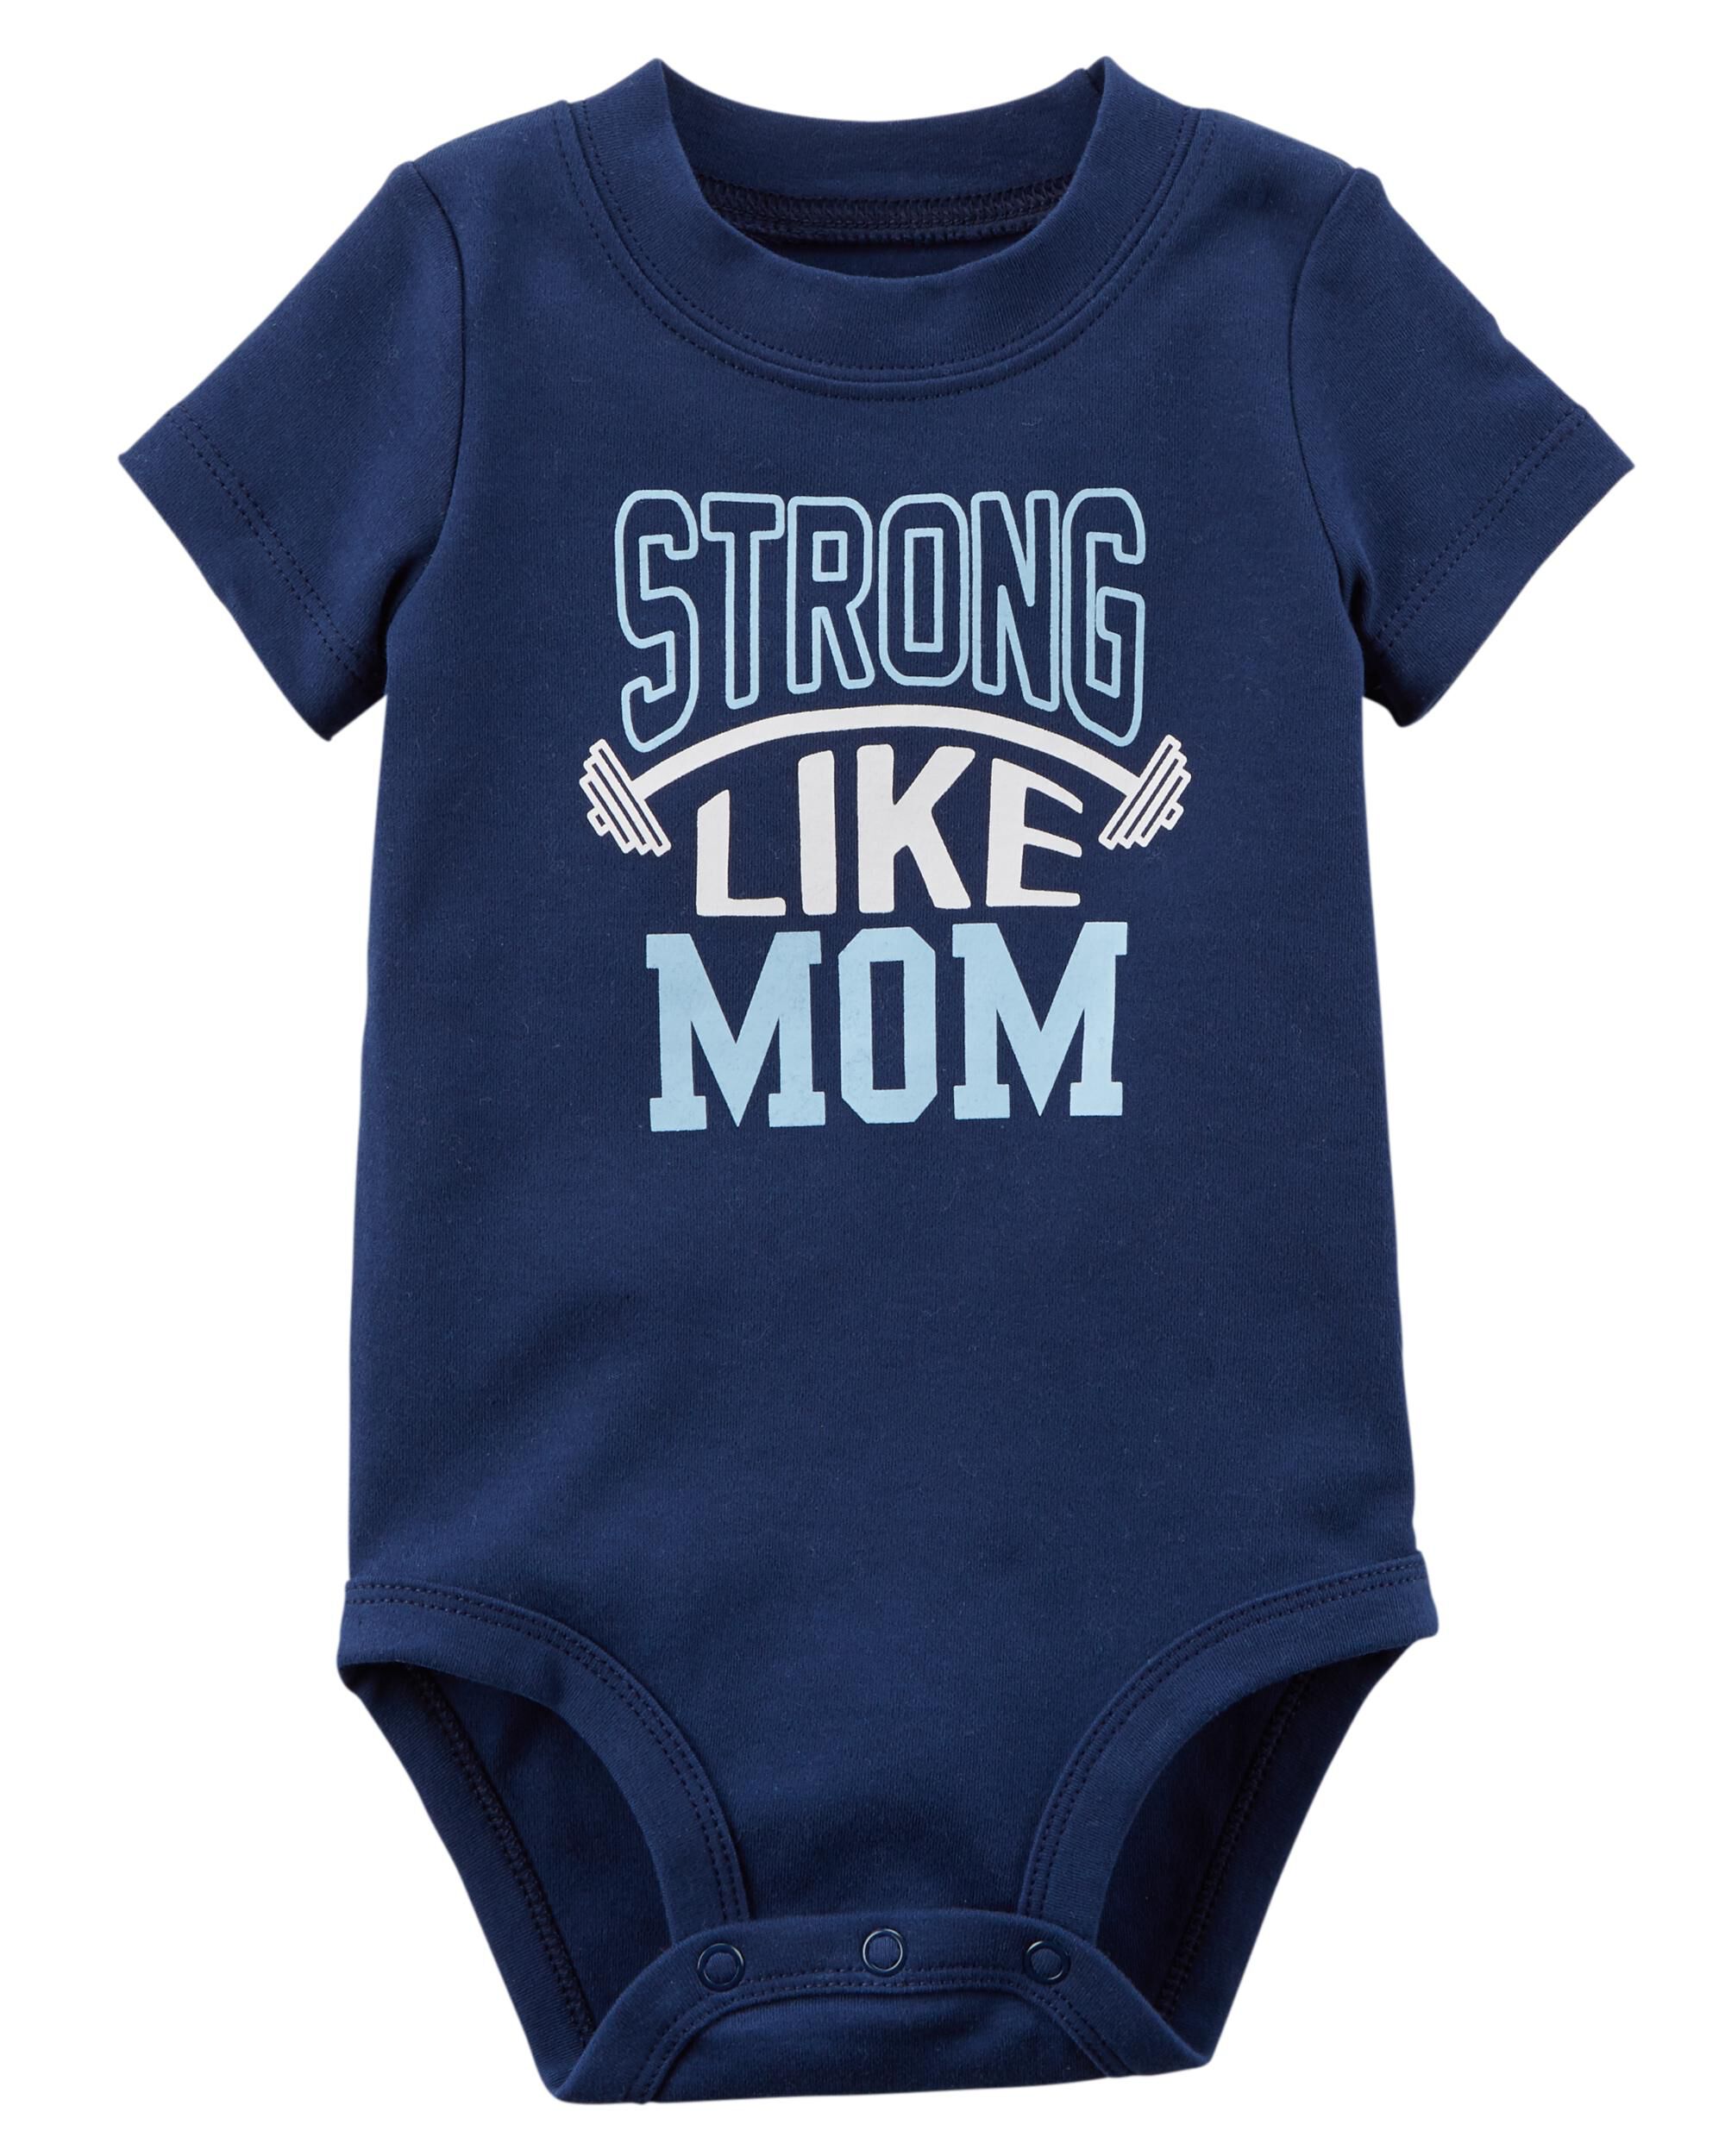 Strong Like Mom Collectible Bodysuit